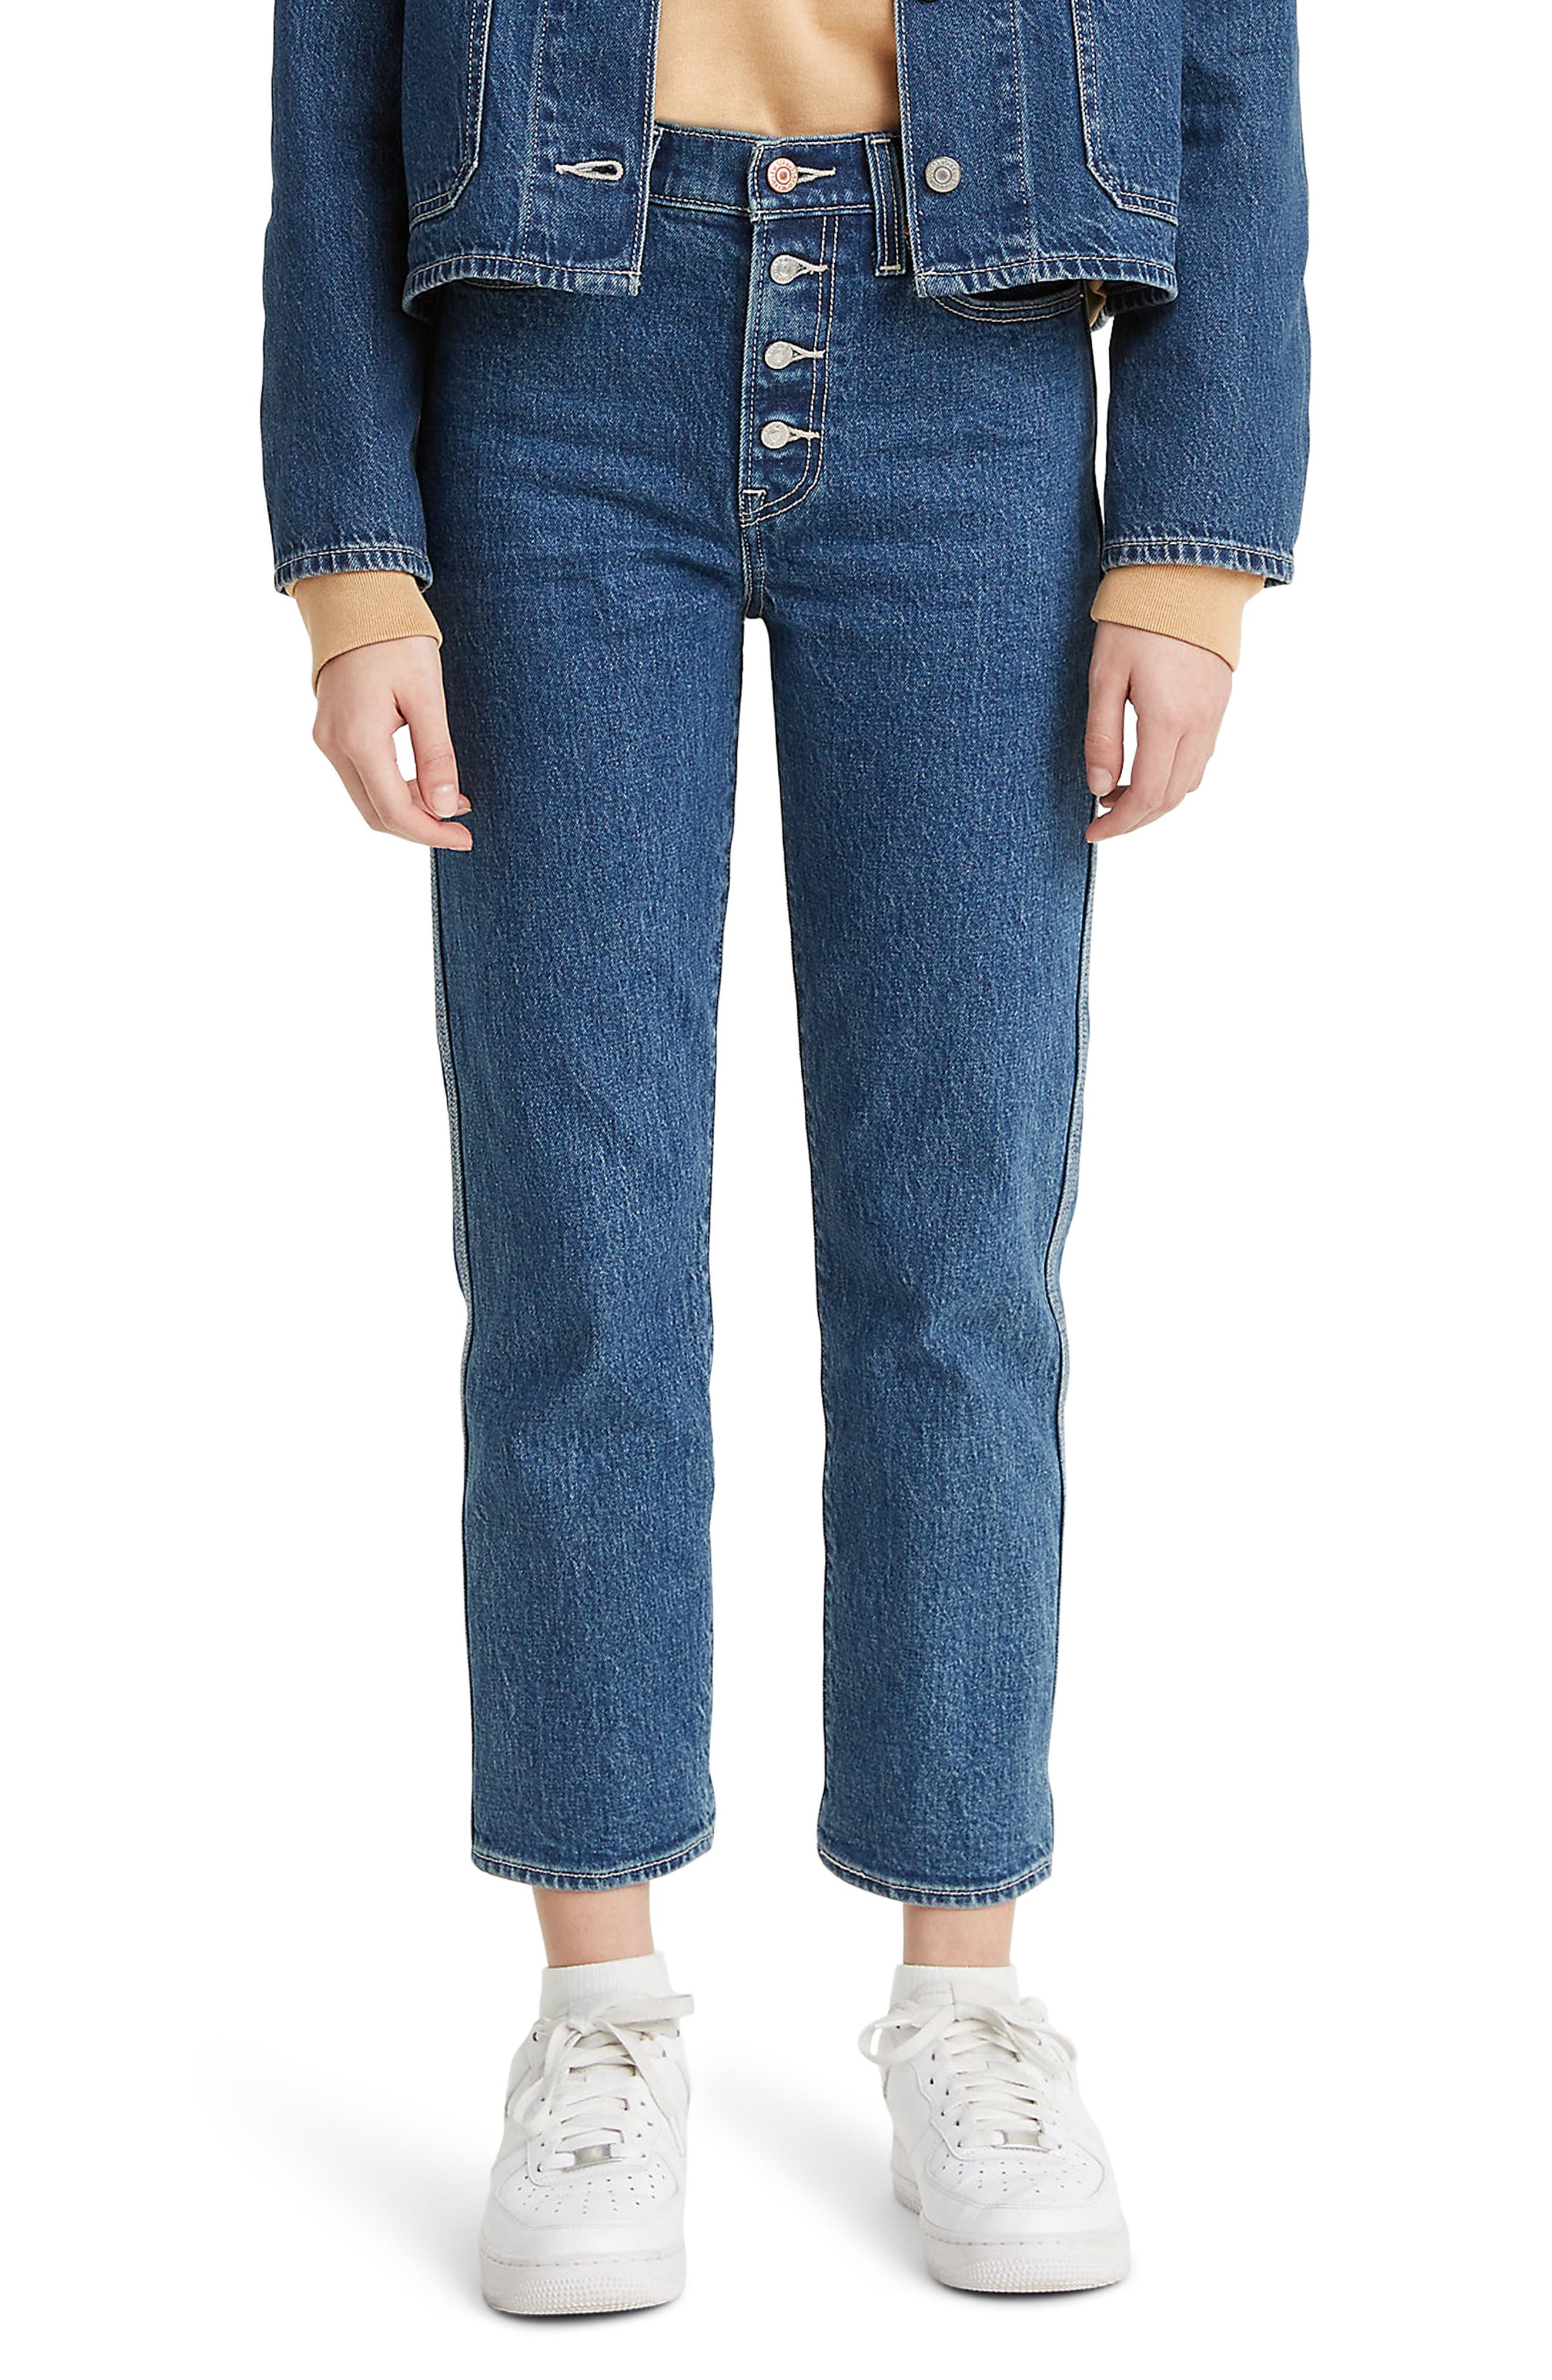 levi's clearance jeans